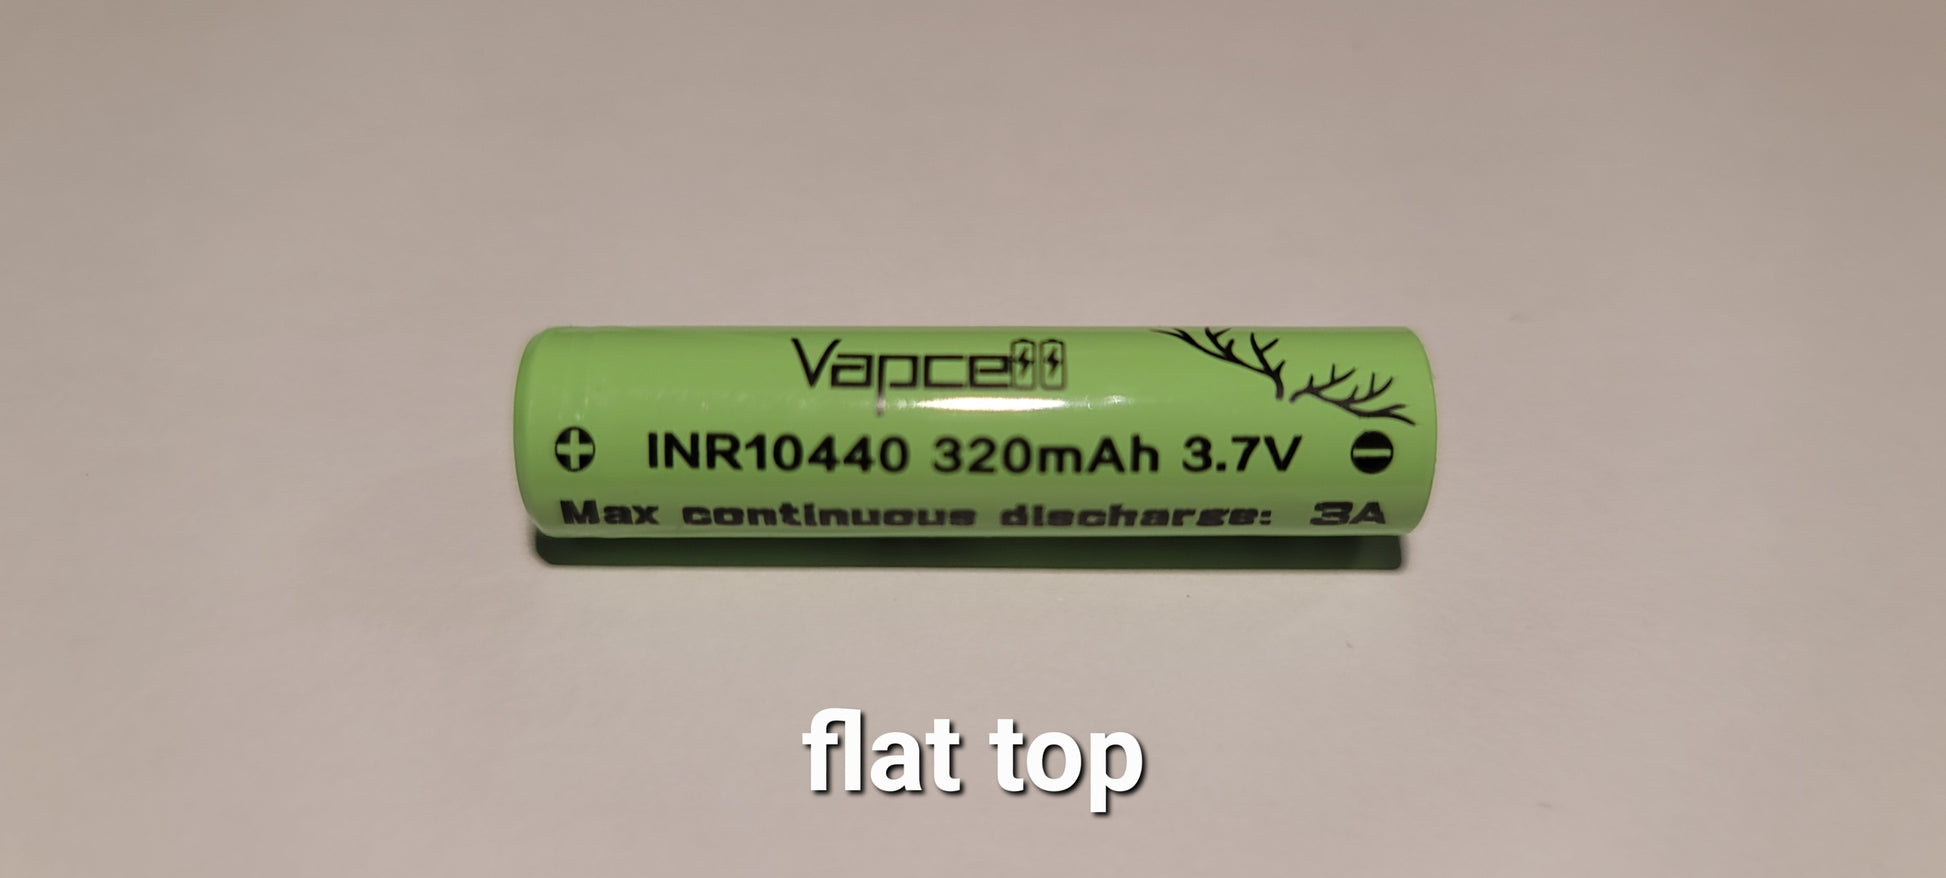 Vapcell INR10440 3.7v 320mAh Rechargeable Li-ion Battery *** HAS TO BE SHIPPED WITH FLASHLIGHT + FEDEX *** FLAT TOP